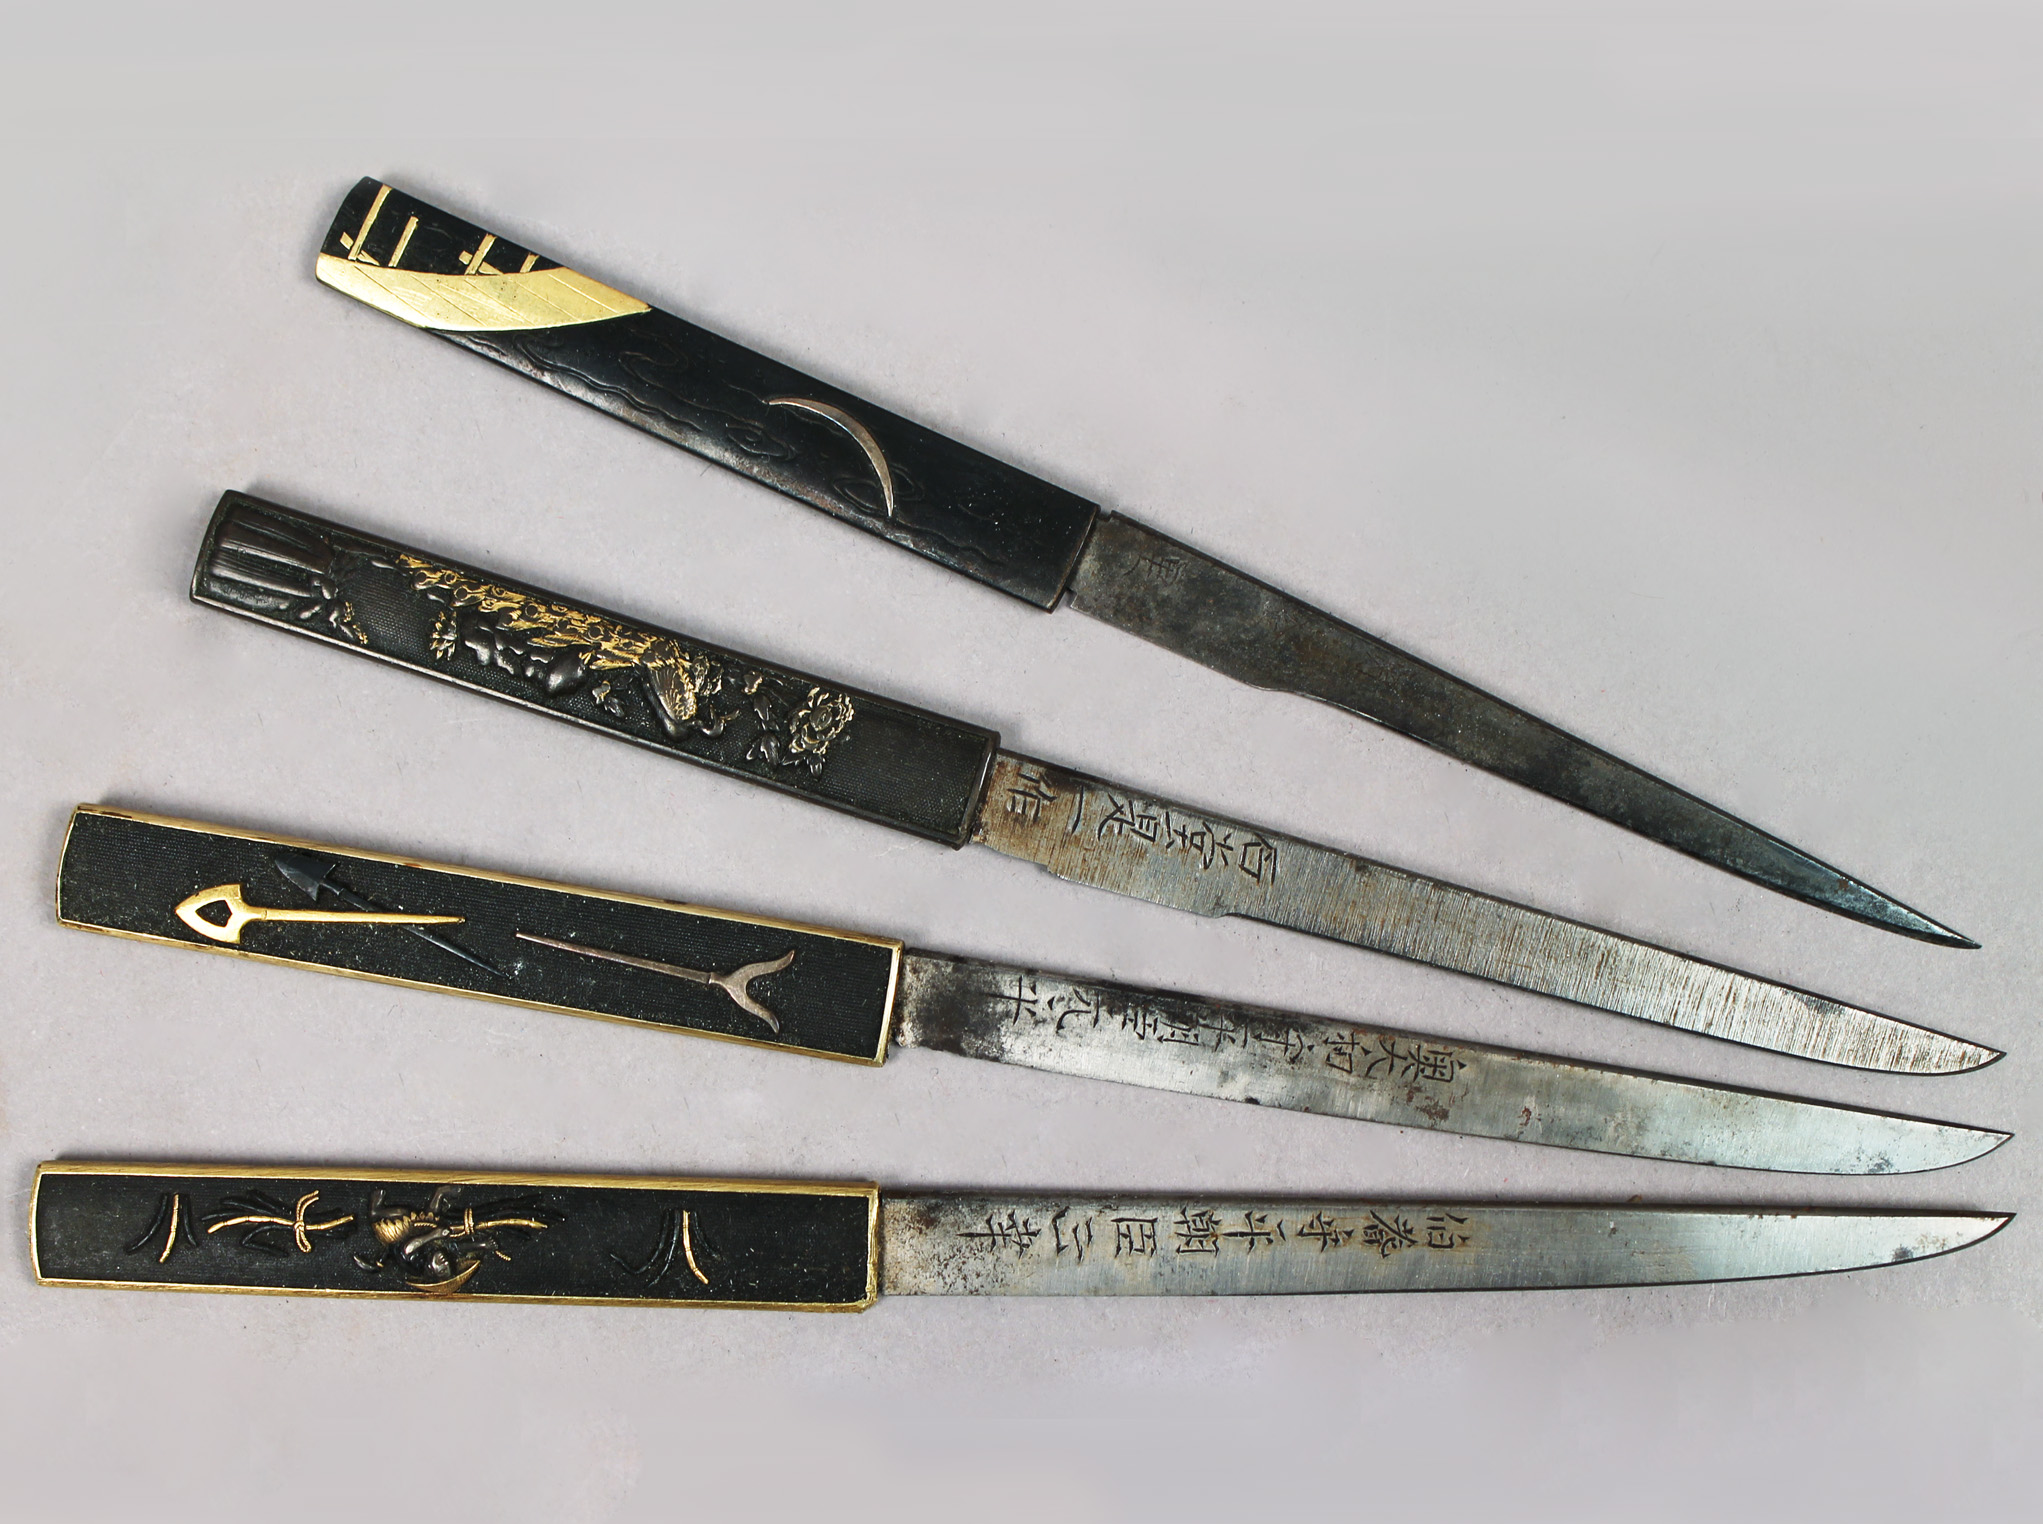 Antique Signed Japanese Knives with Black and Gold Lacquered Wood Handles